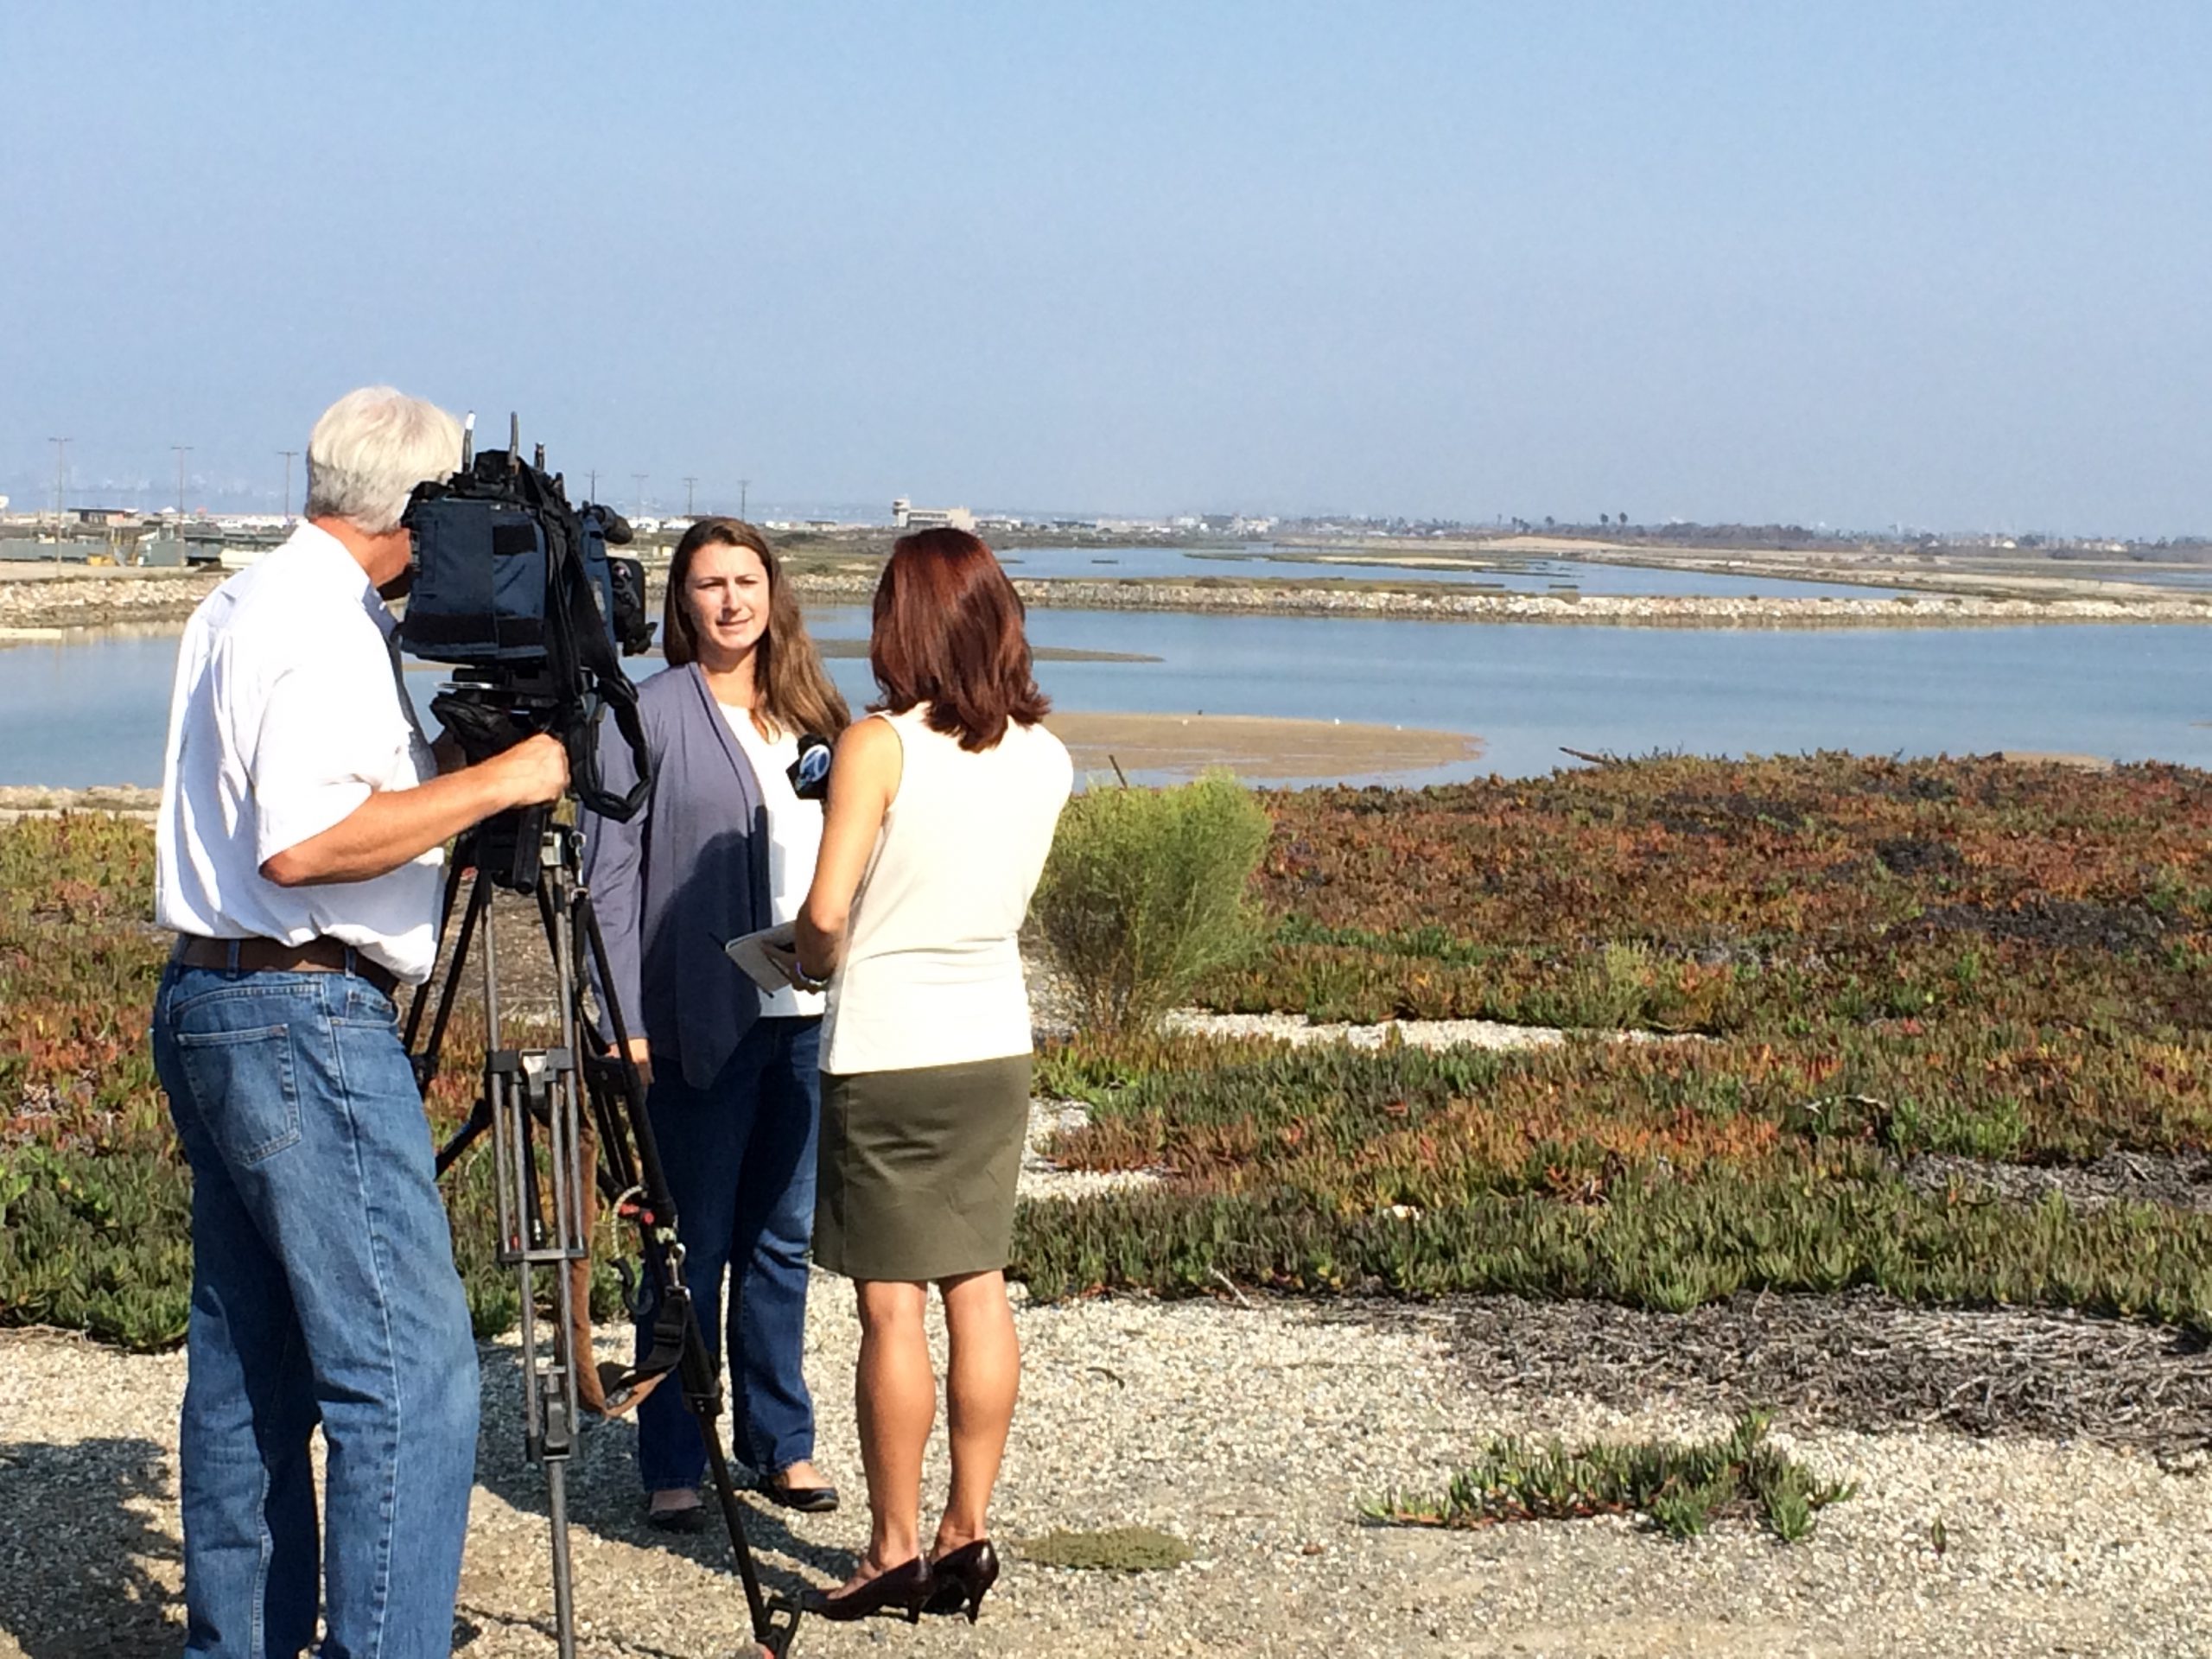 Jennifer Lucchesi, speaking at the 10th anniversary celebration for the Bolsa Chica Lowlands Restoration Project